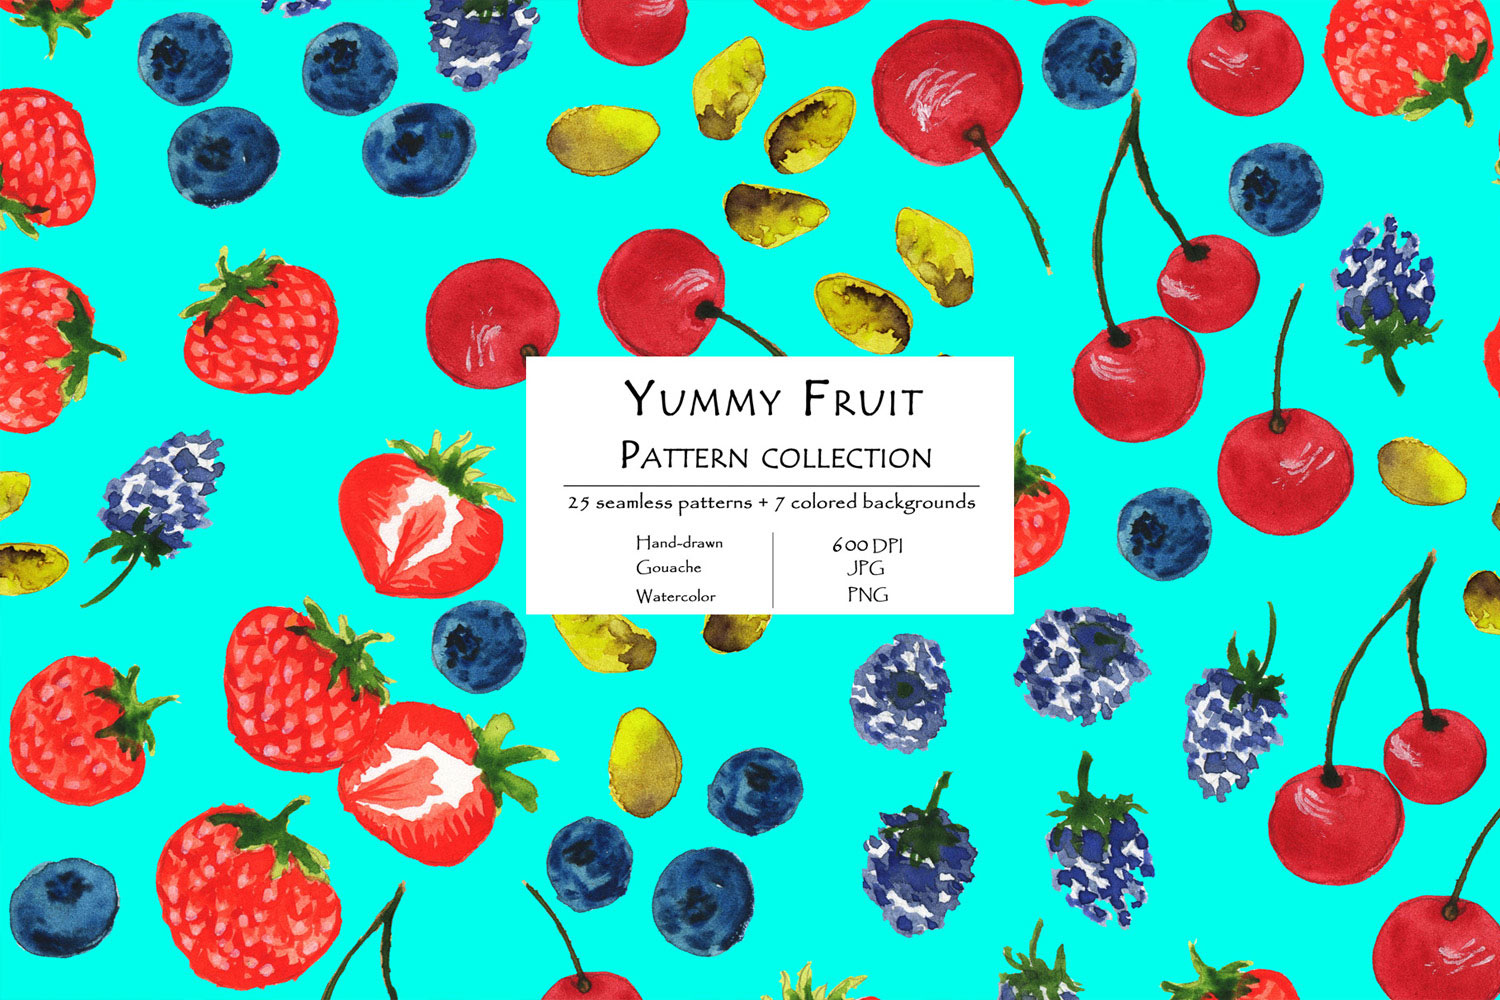 Yummy Fruit Pattern Collection With 25 Seamless Patterns And 7 Backgrounds Blue Background Example.